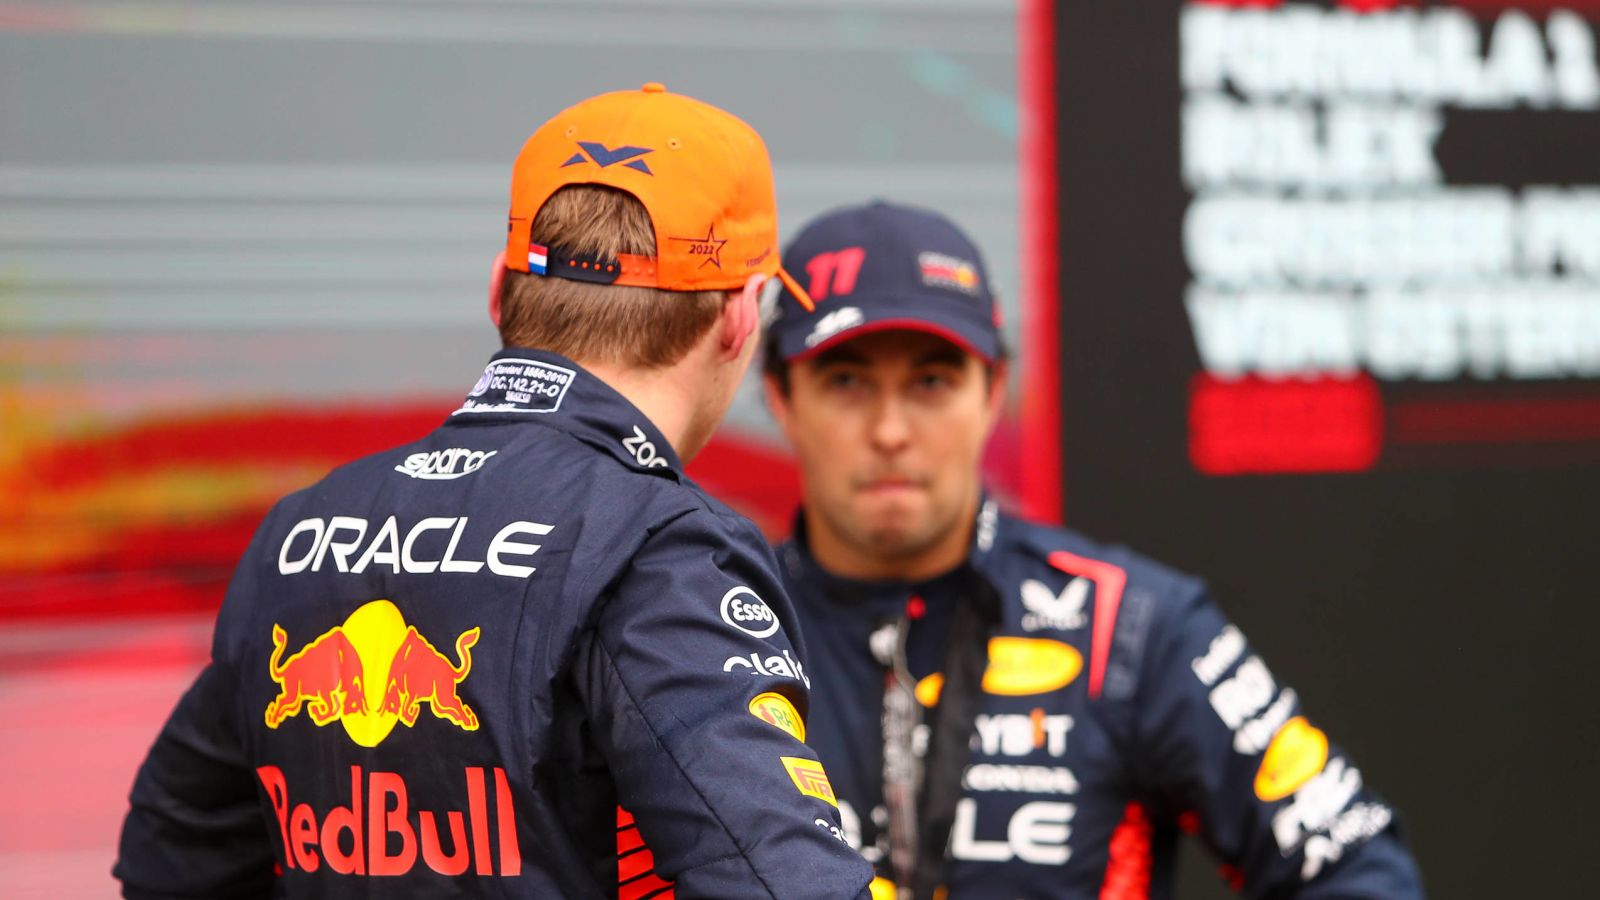 Sergio Perez stares awkwardly at Red Bull team-mate Max Verstappen after their titanic battle in the Austrian Grand Prix sprint race. Styria, July 2023.